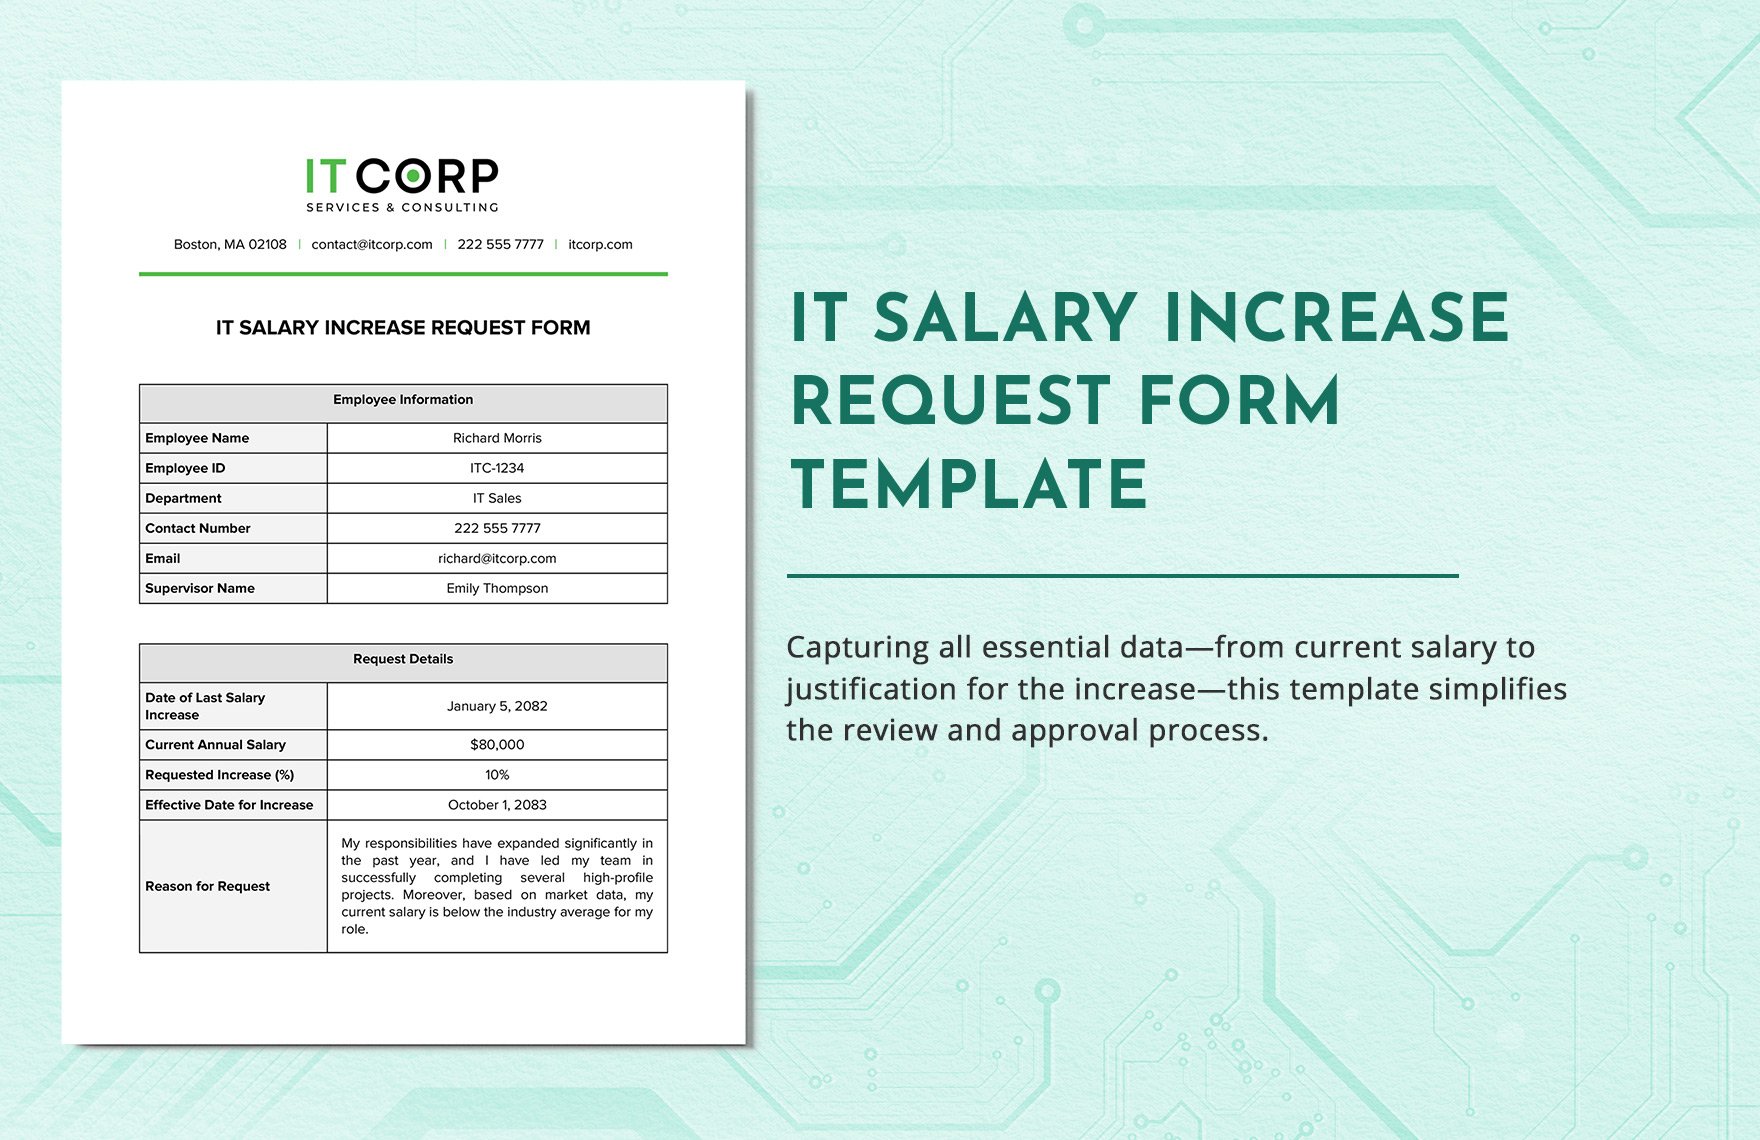 IT Salary Increase Request Form Template